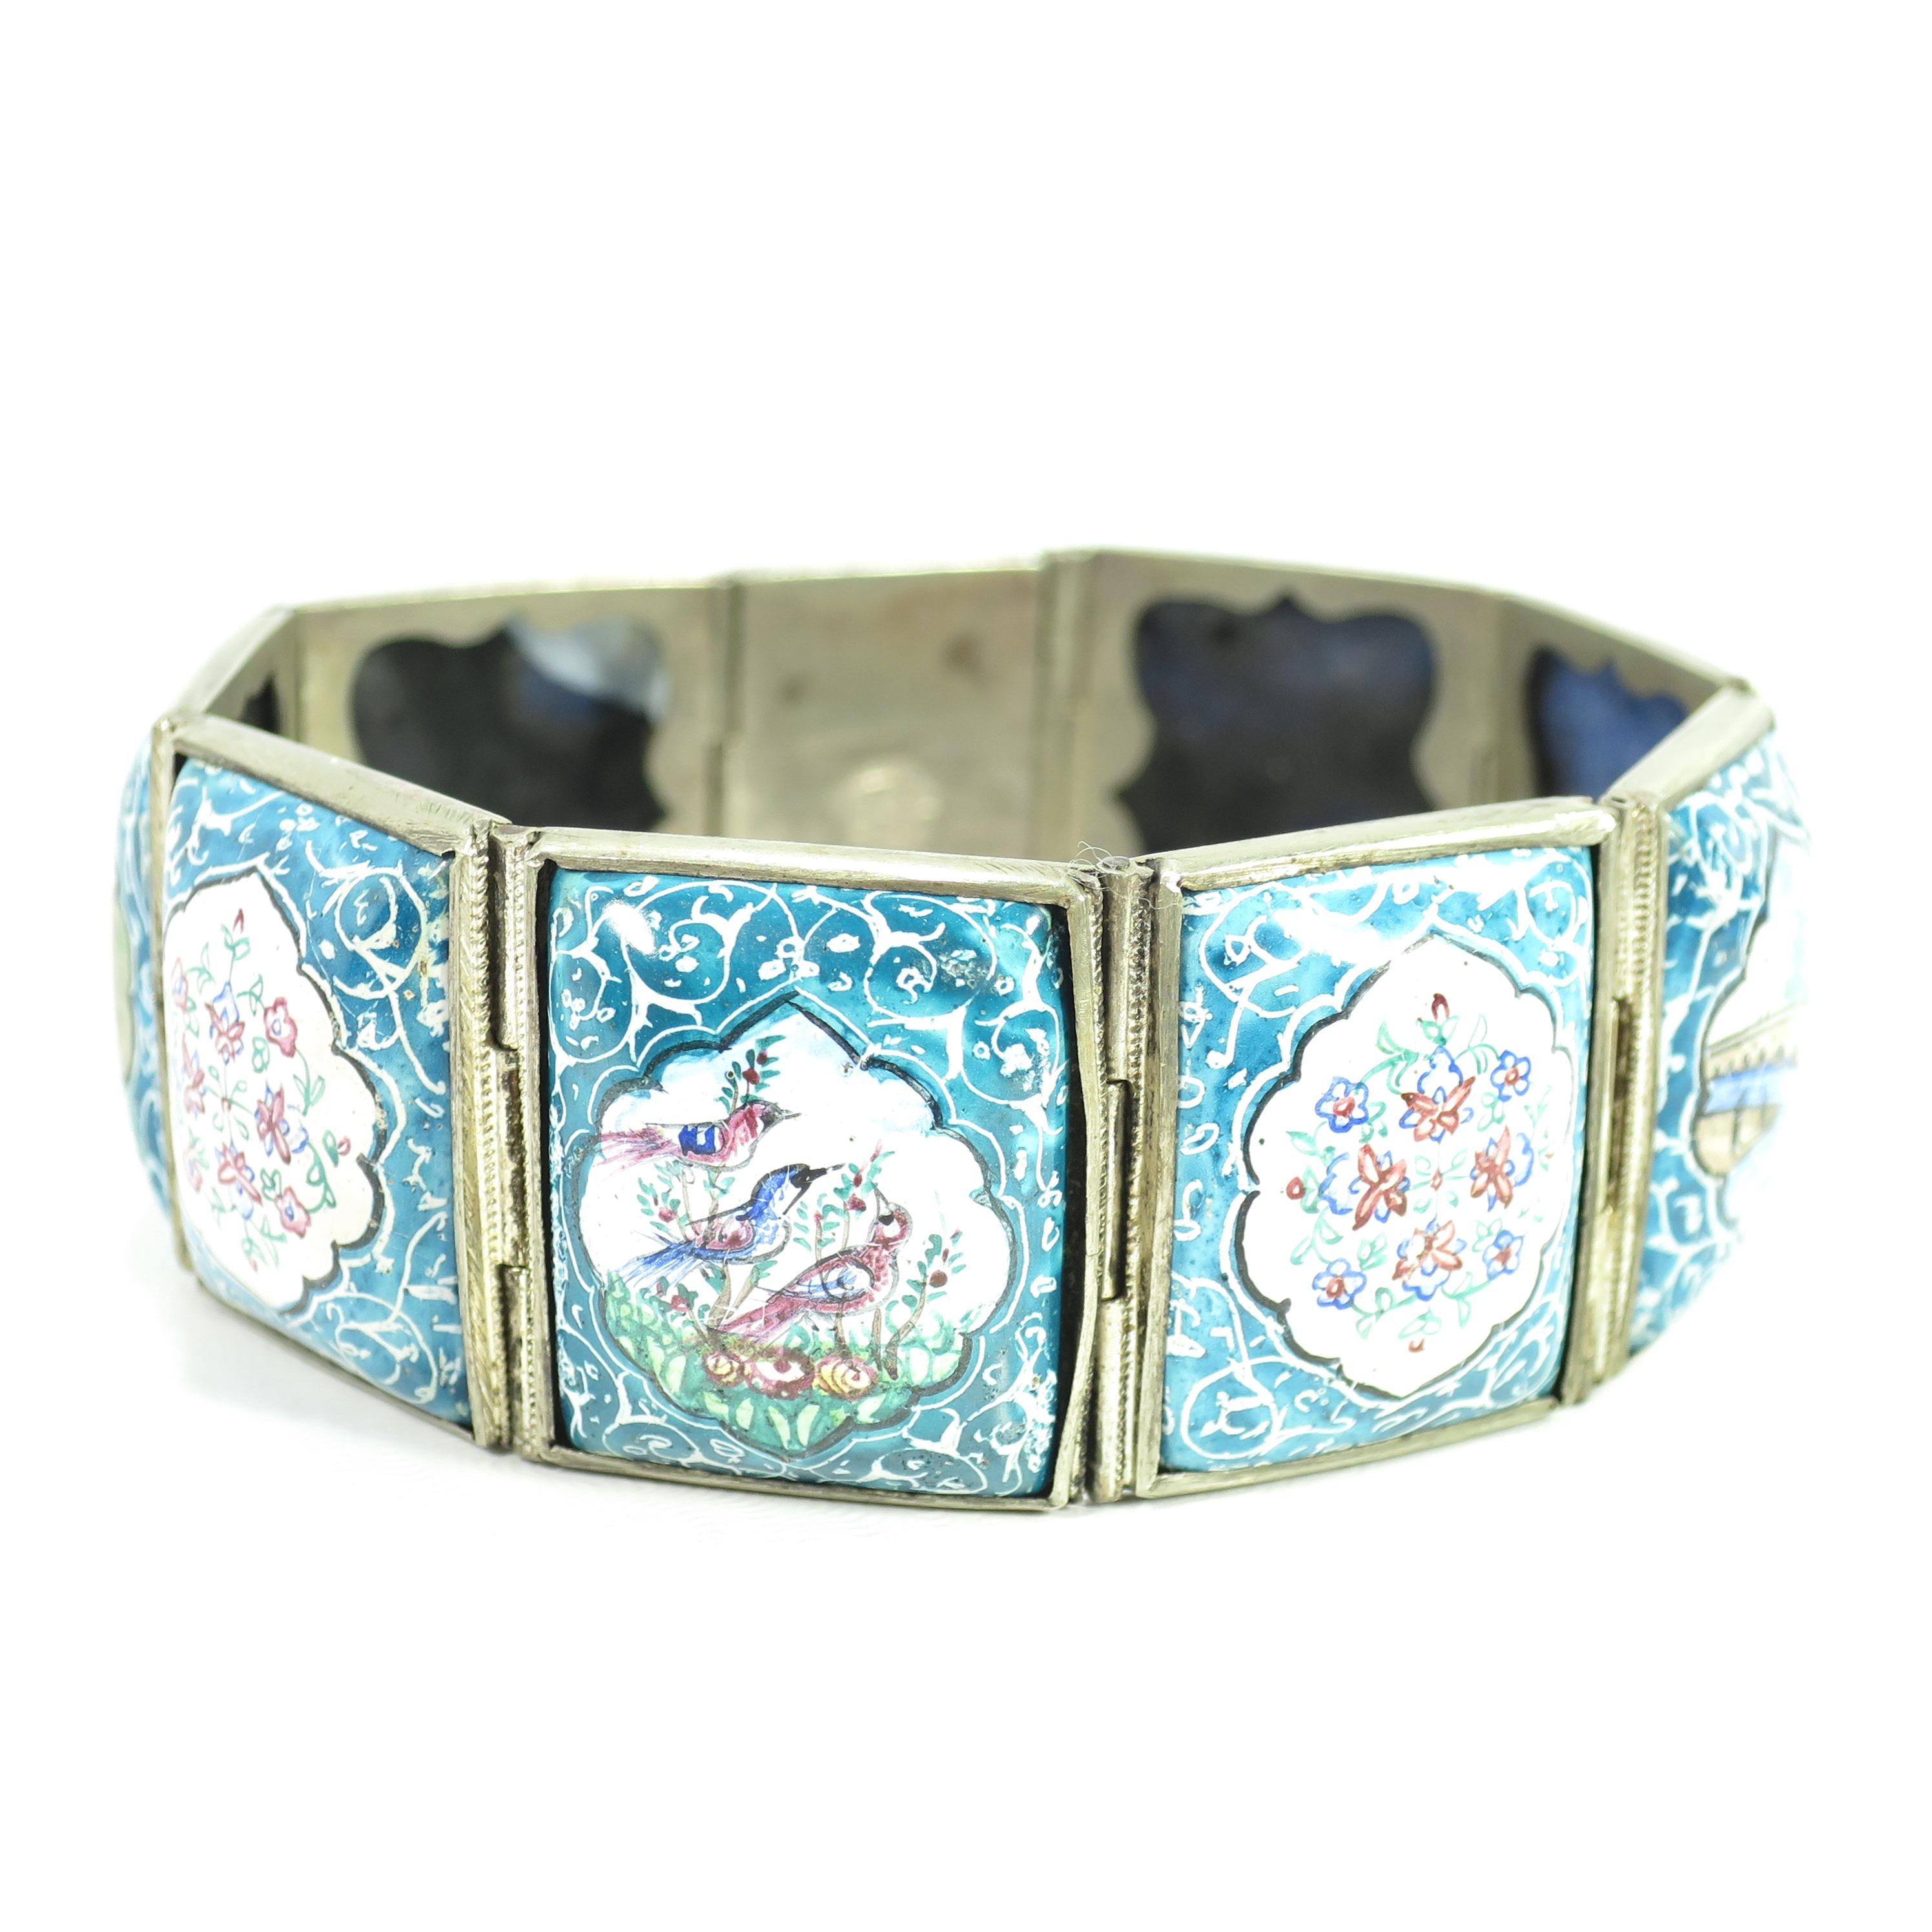 Persian Isfahan Silver Enamel Articulated Panel Bracelet, Artist-Signed 1930s For Sale 4